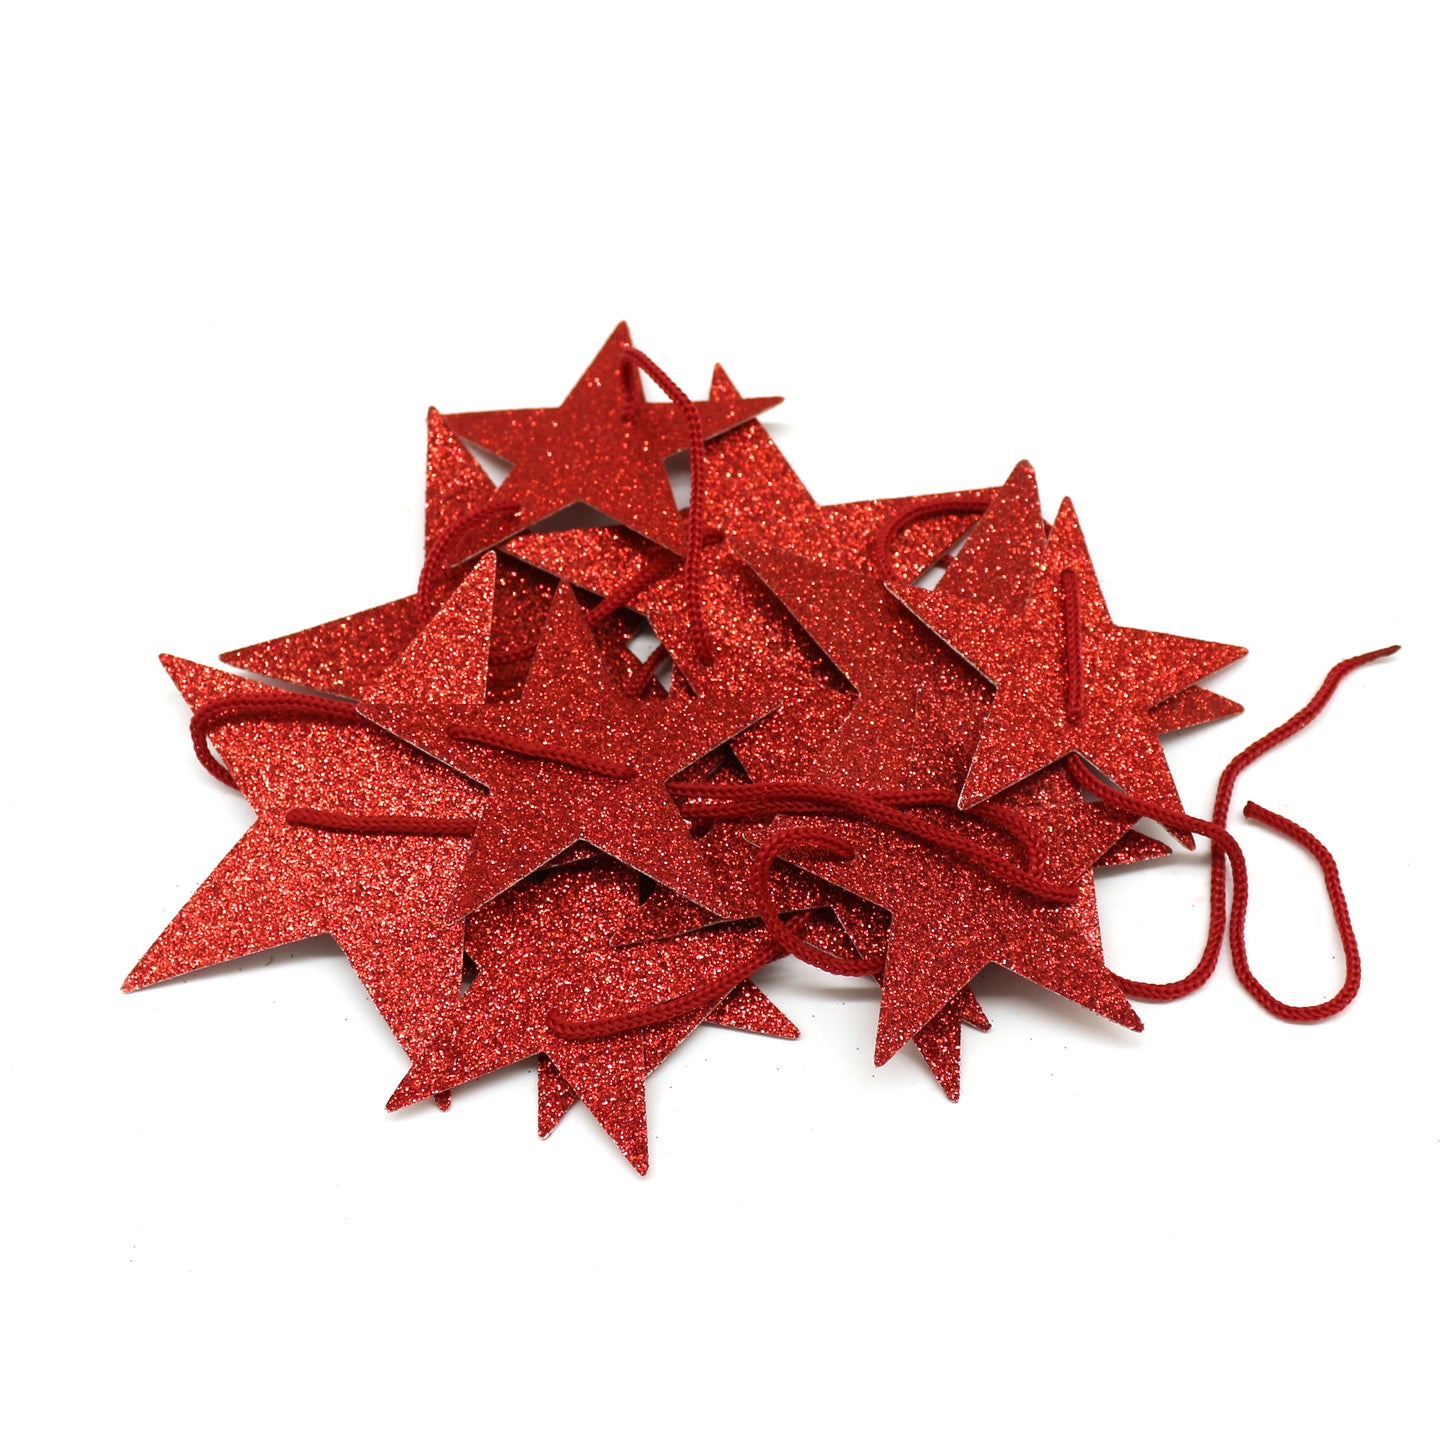 CVHOMEDECO. Twinkle Glittered Paper Star String Star Garland Unique Hanging Bunting Banner for Wedding Birthday Party Festival Home Background Decoration, 5.5 feet, Pack of 2 PCS (Red)